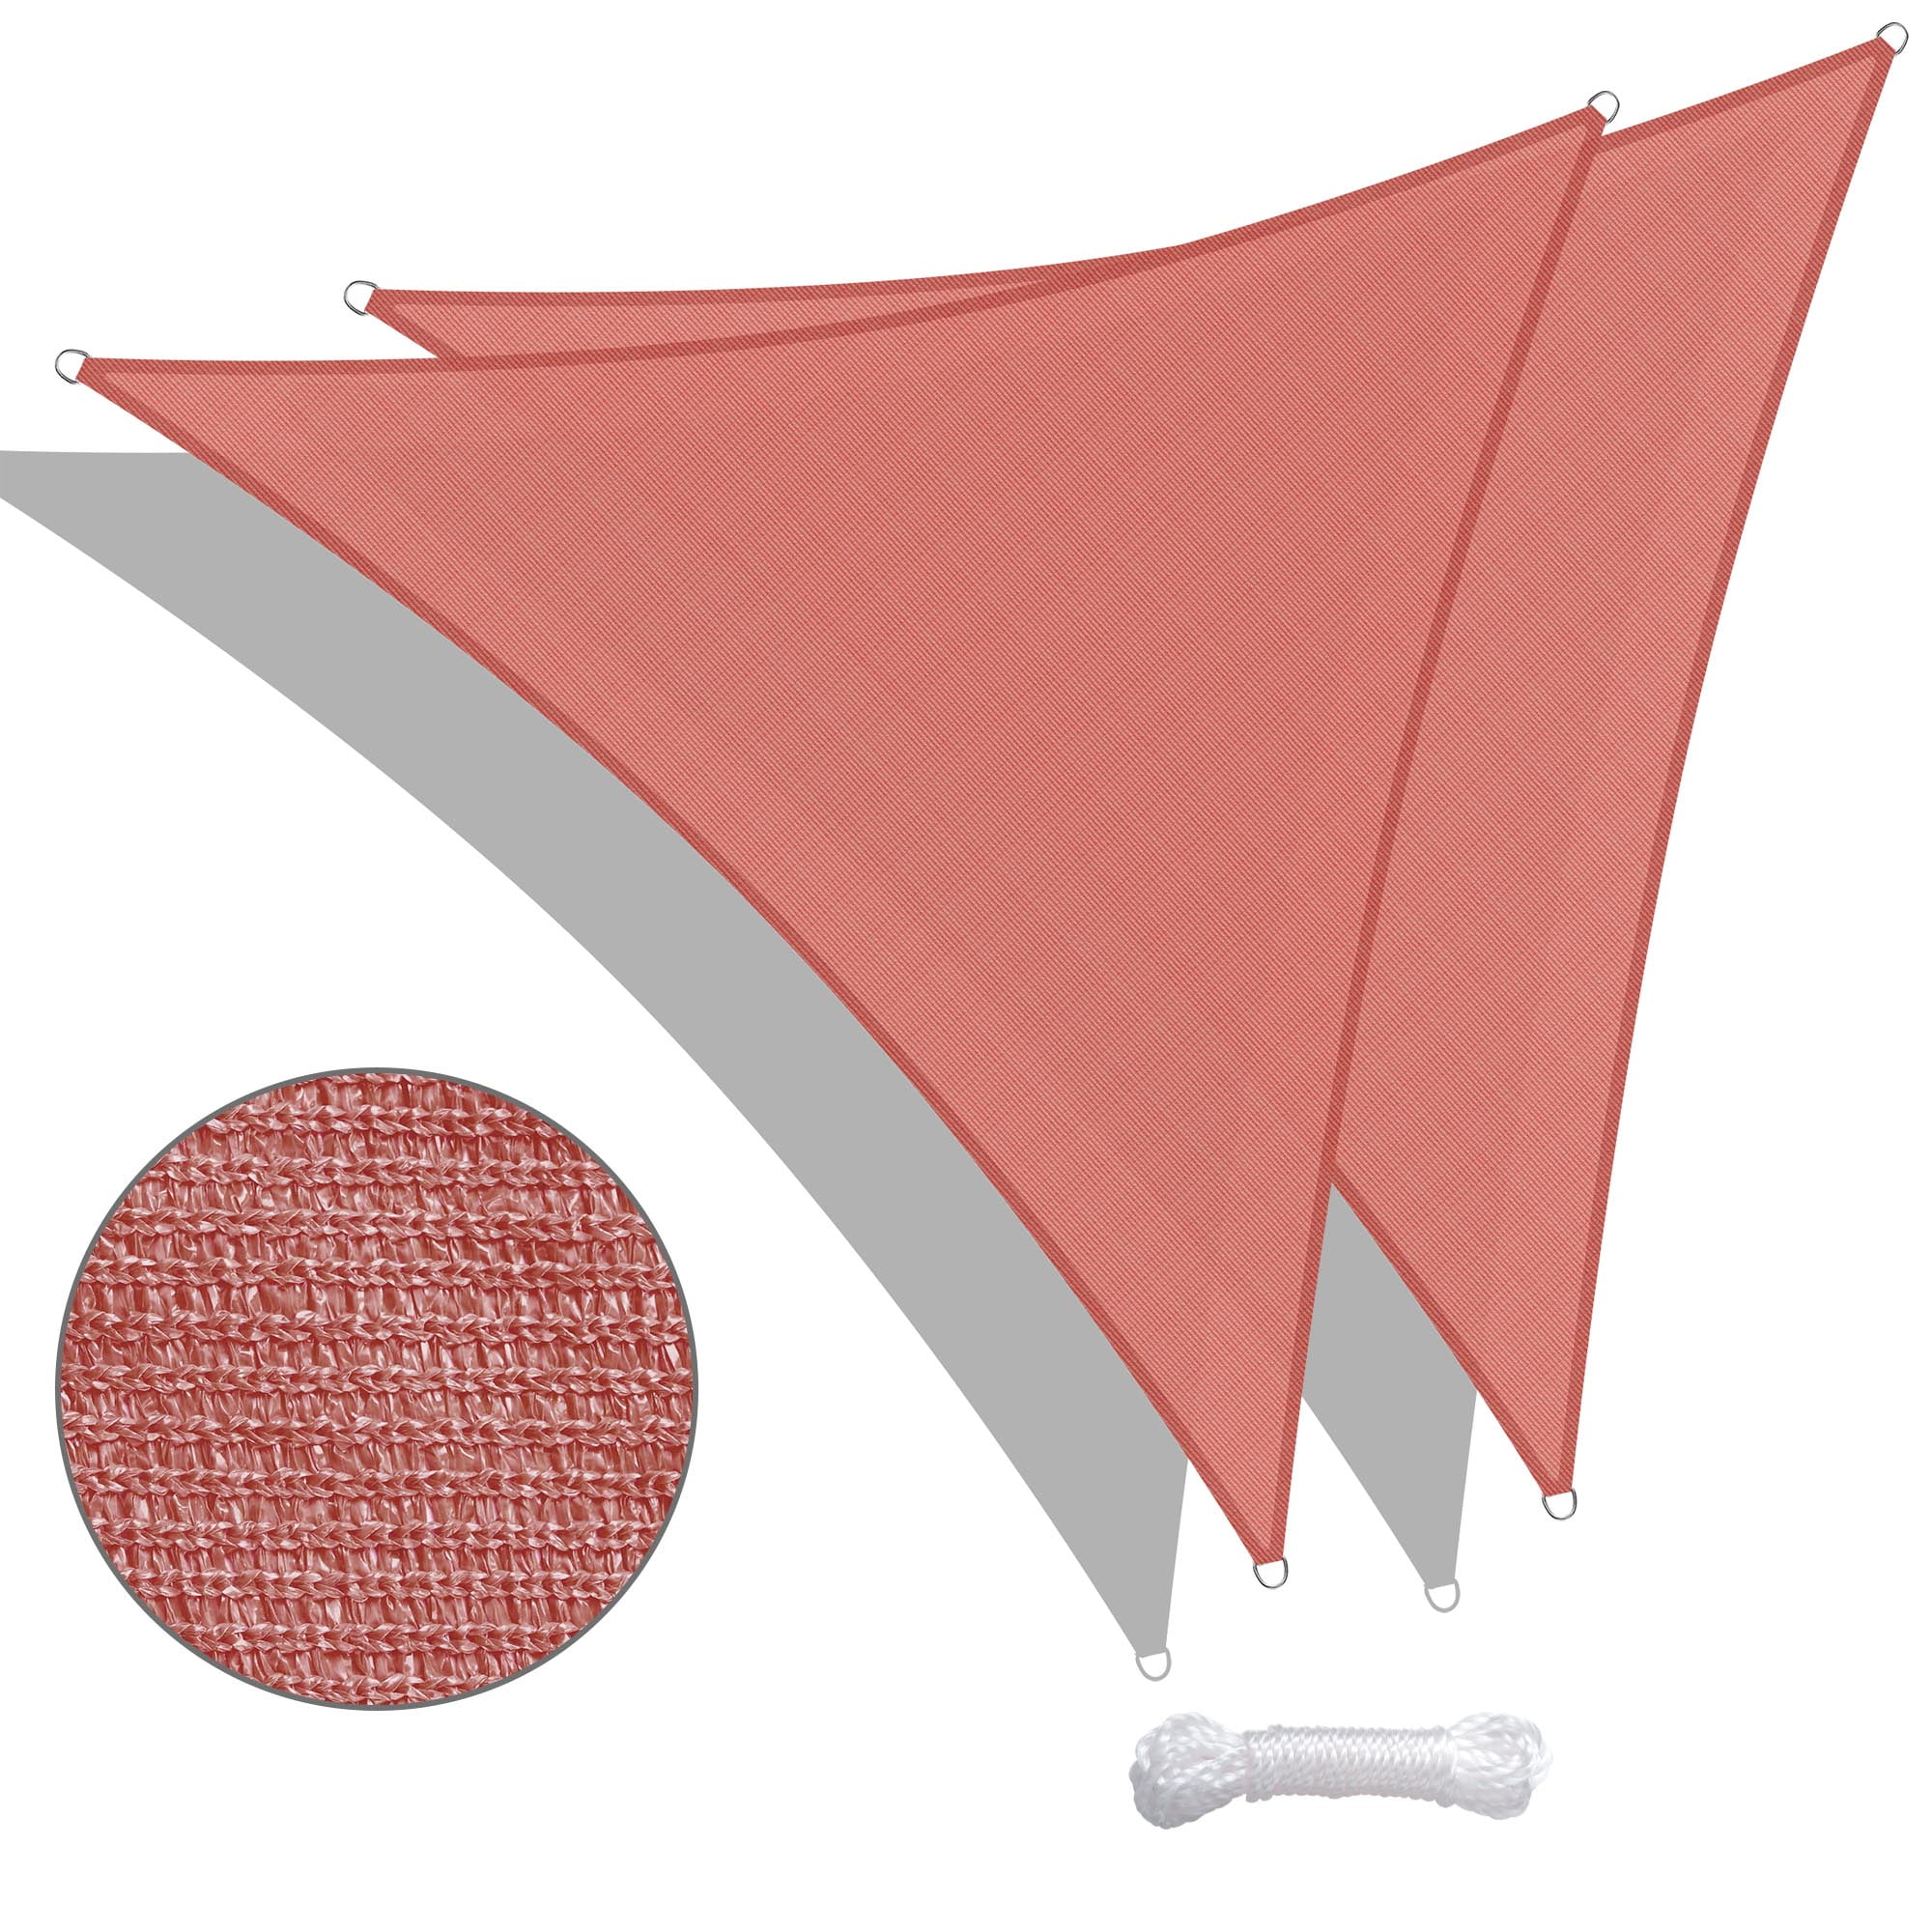 Details about   Sail Shade Sun Patio Canopy Outdoor Triangle Uv Pool Cover Colors Block Size